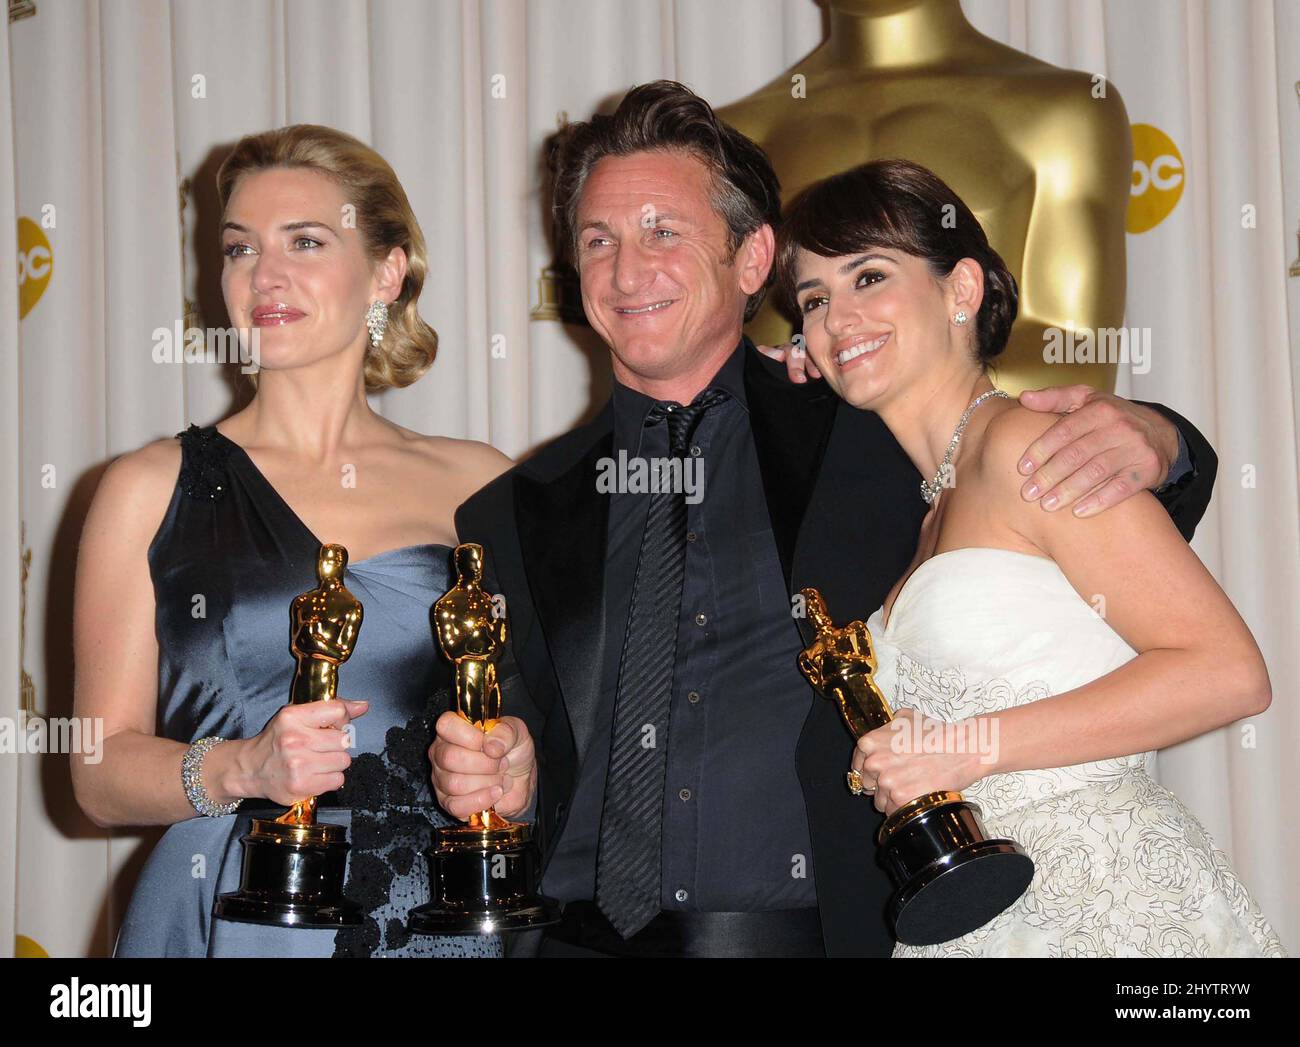 Kate Winslet, Sean Penn and Penelope Cruz (left to right) with their awards for Best Actress, Best Actor and Best Actress in a Supporting Role, at the 81st Academy Awards at the Kodak Theatre, Los Angeles. Stock Photo